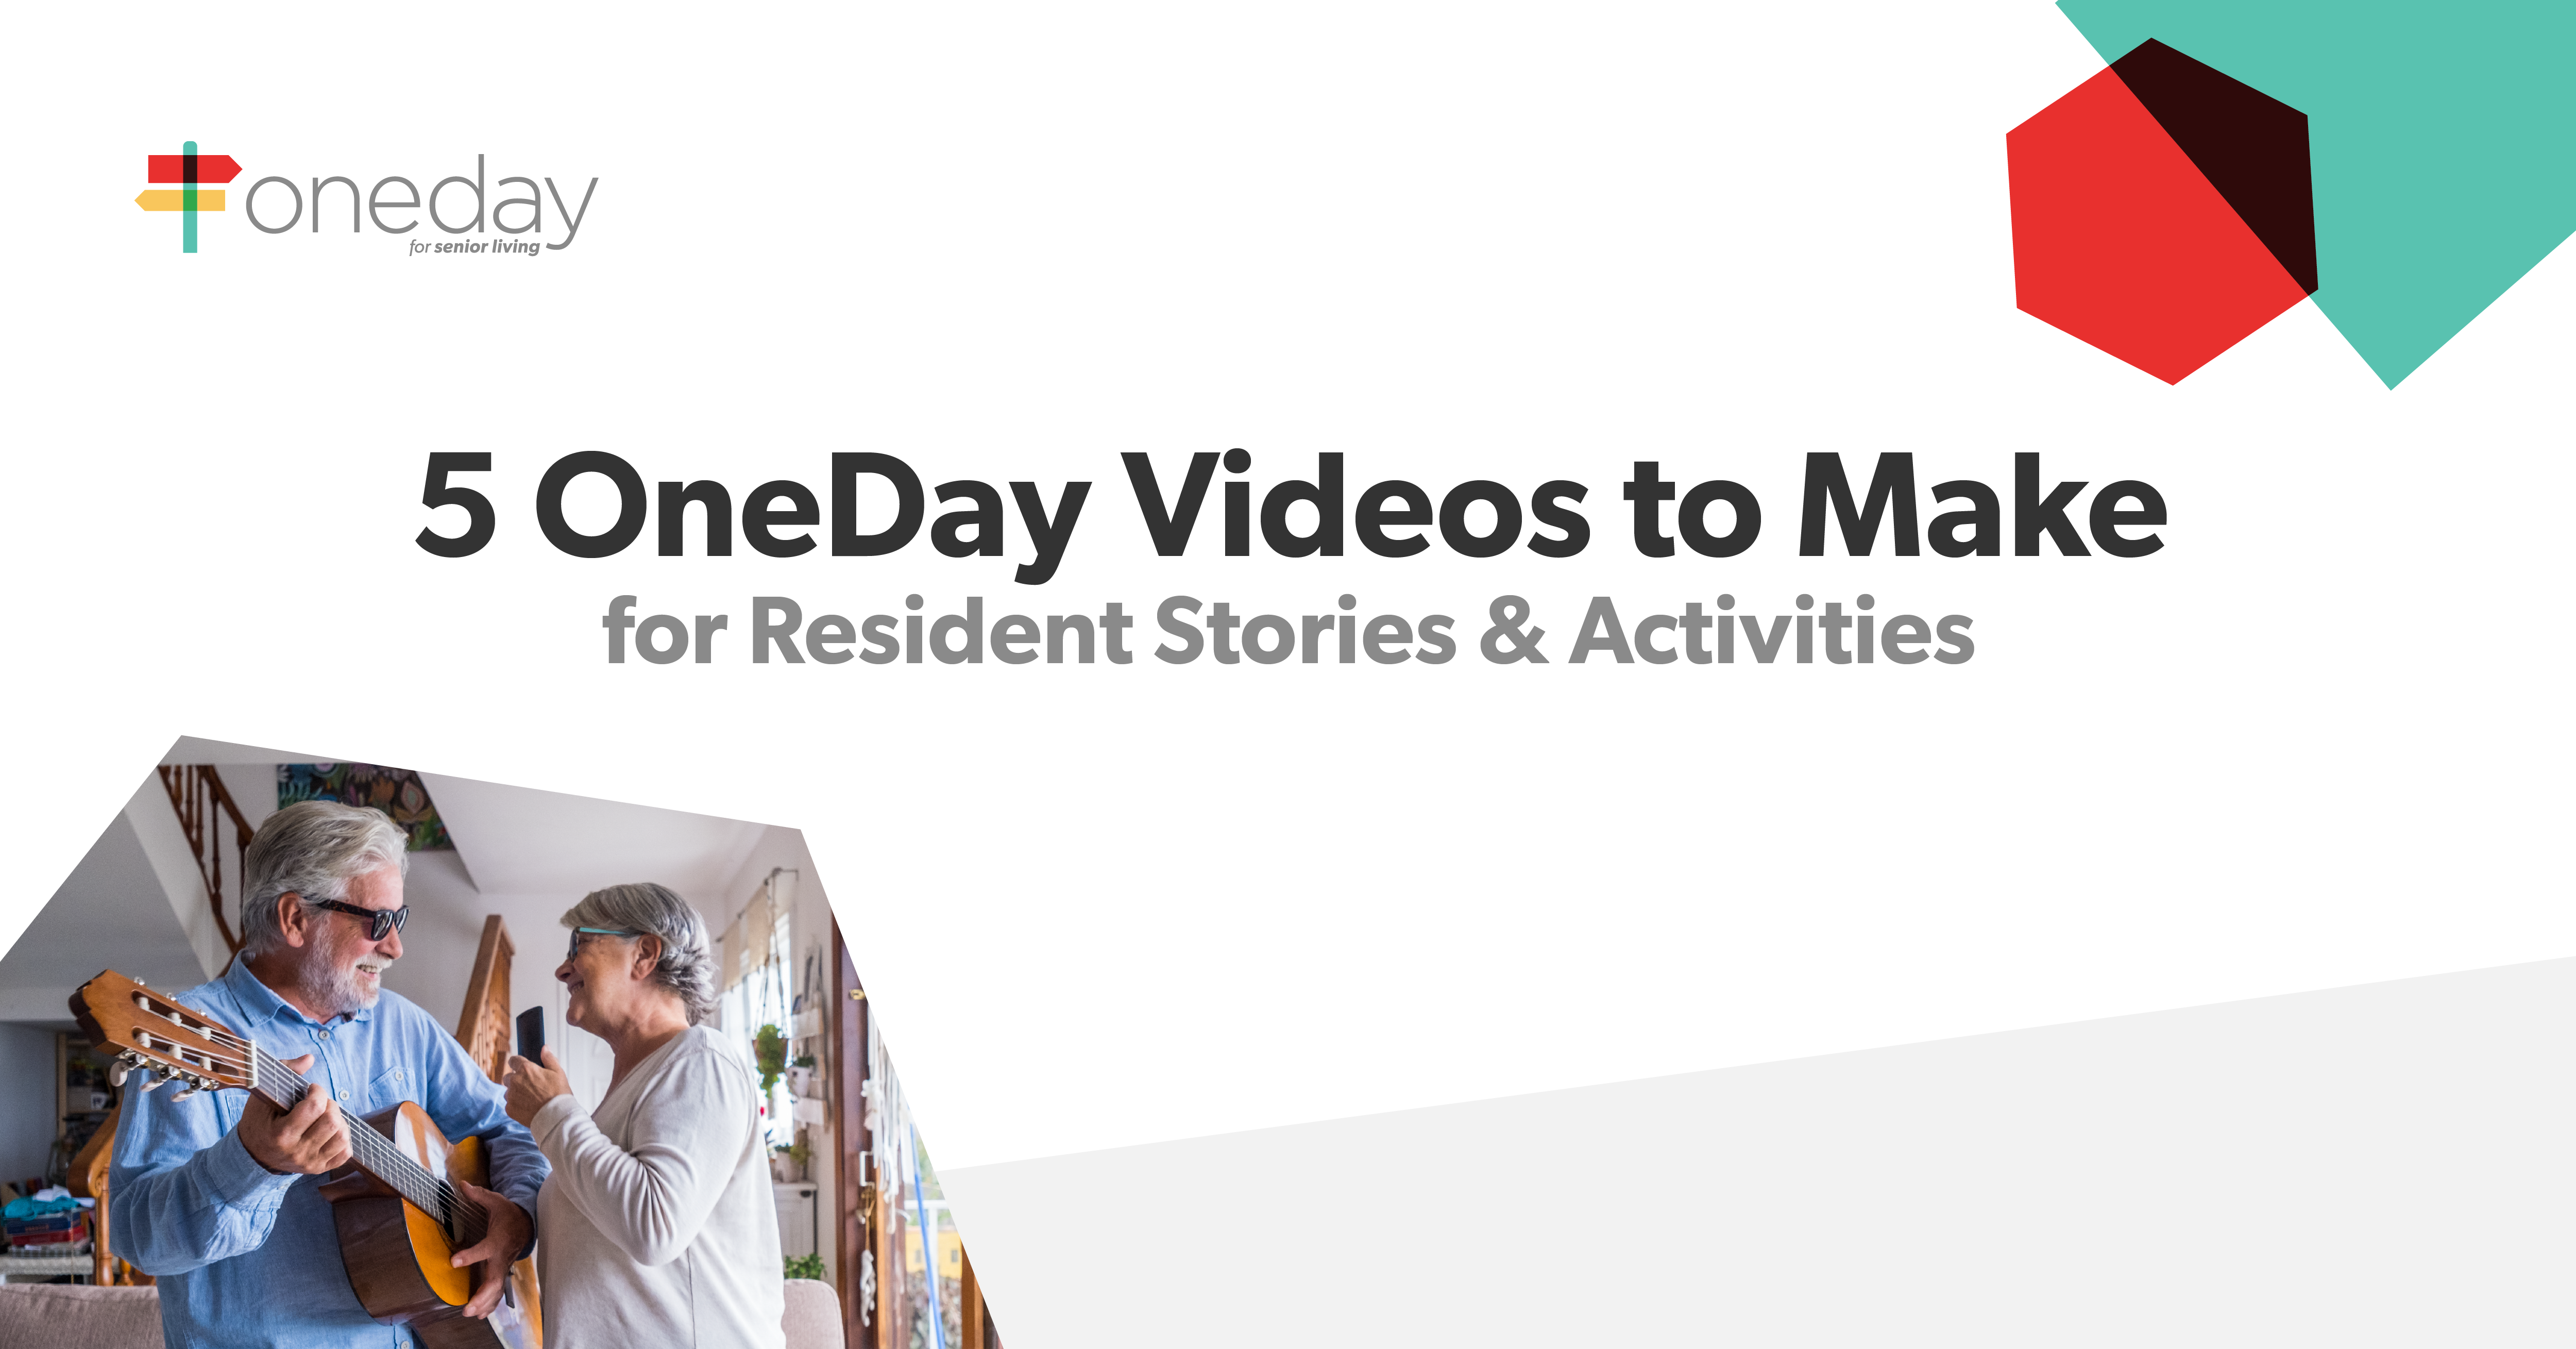 A look at five simple yet powerful instances where OneDay Resident Story videos will benefit your senior living community’s residents and their loved ones.